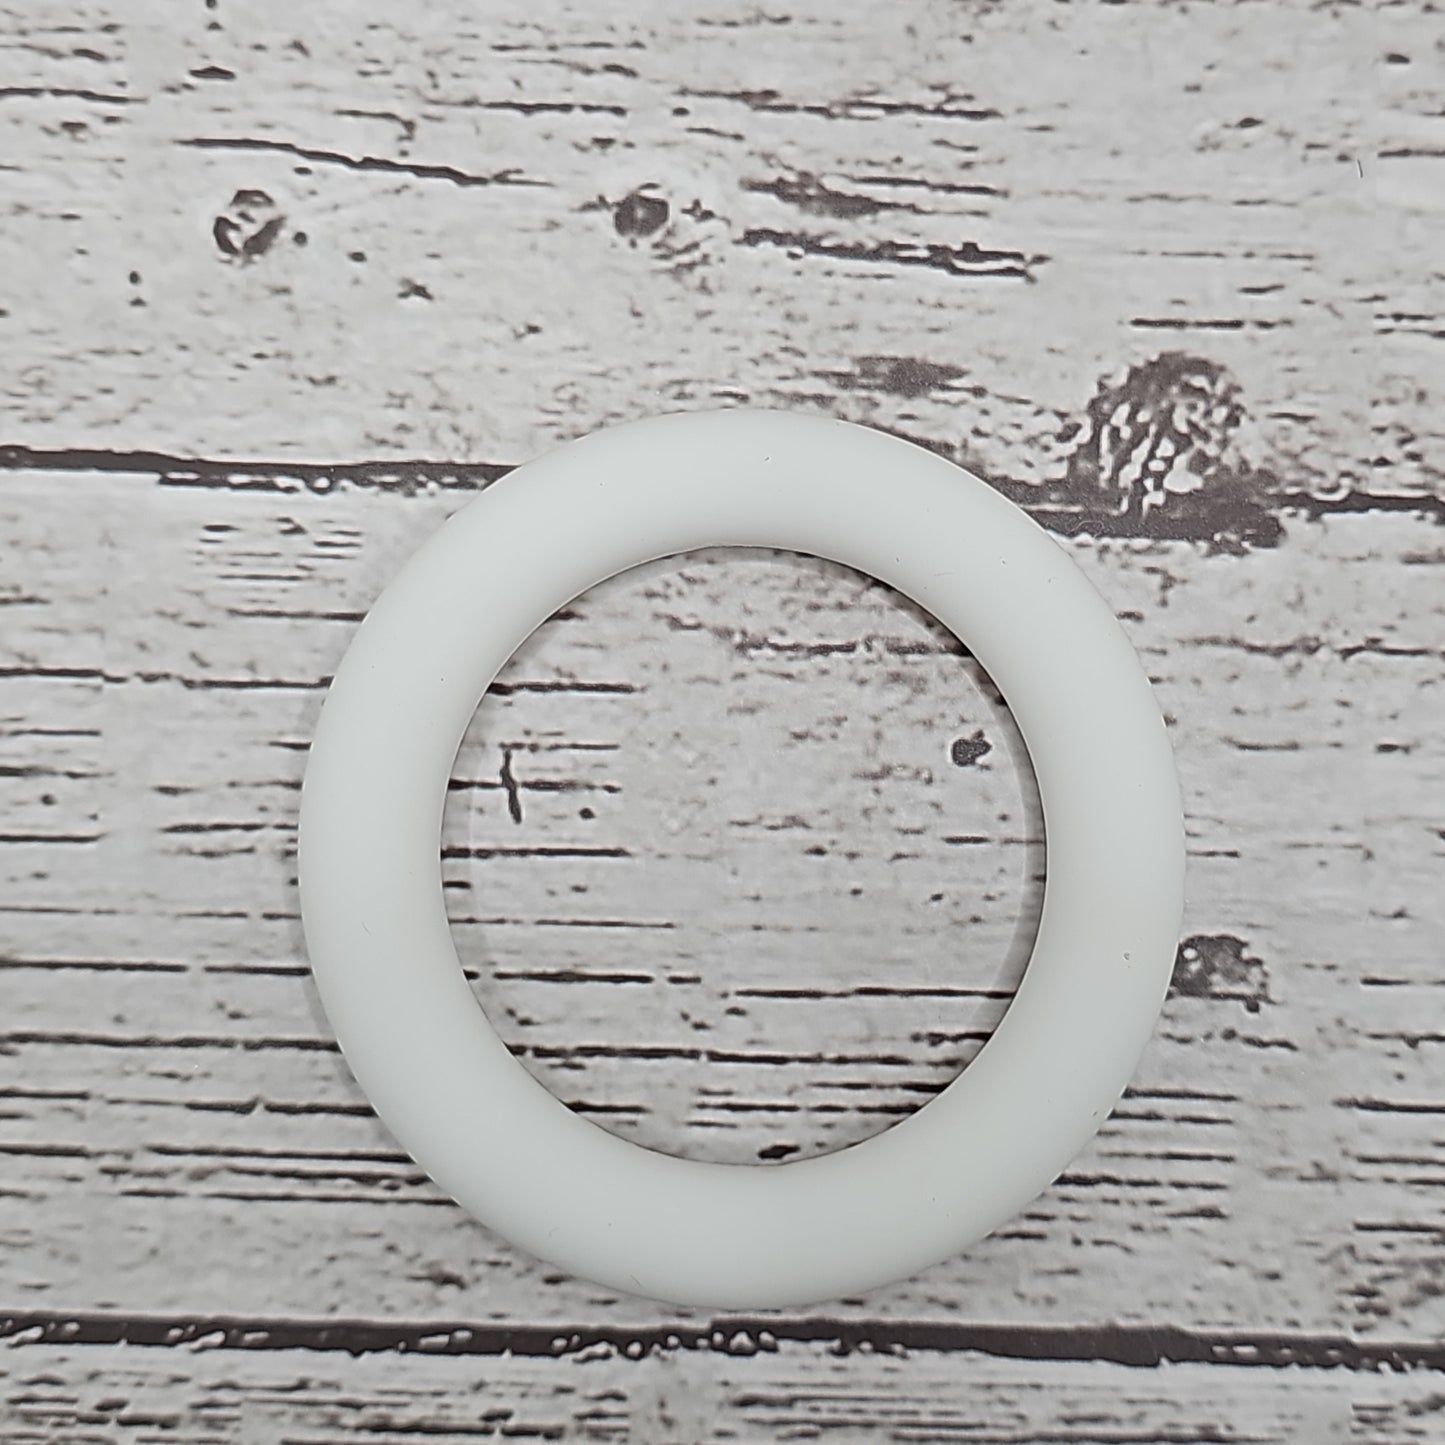 Silicone Rings